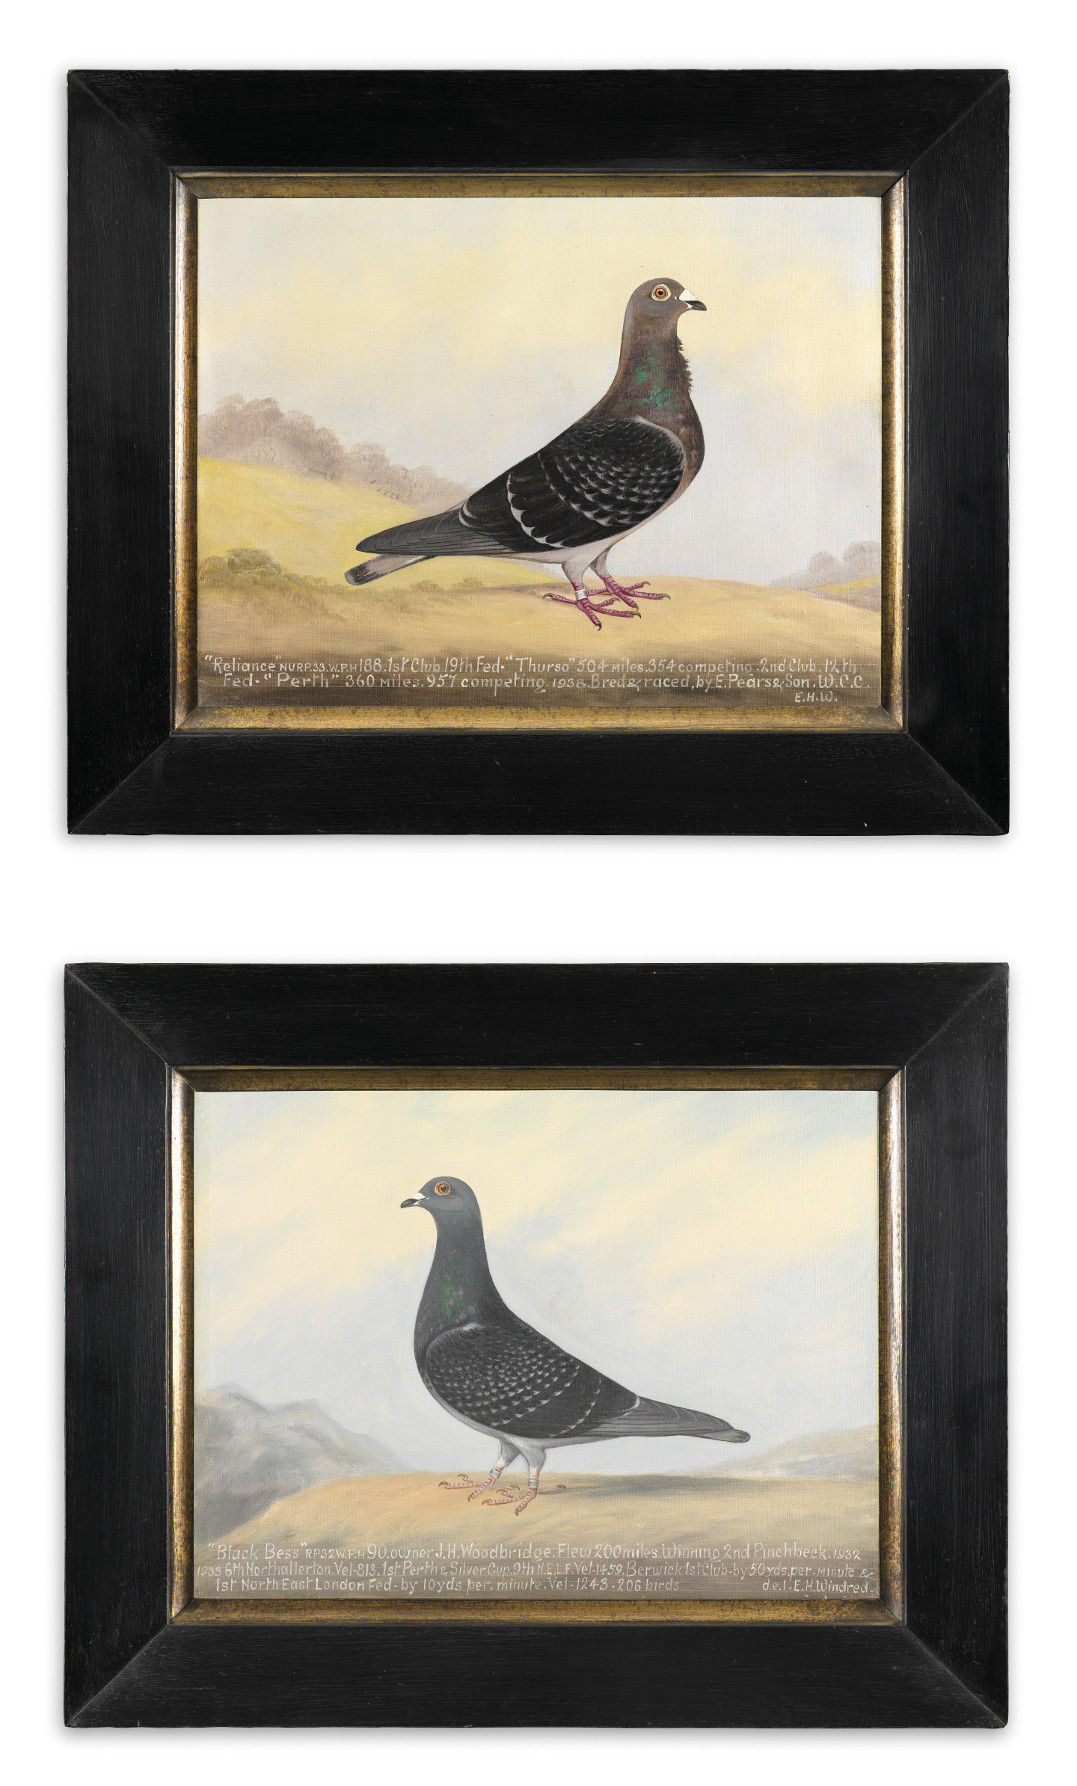 Two Racing Pigeon Portraits 'Reliance' and 'Black Bess'